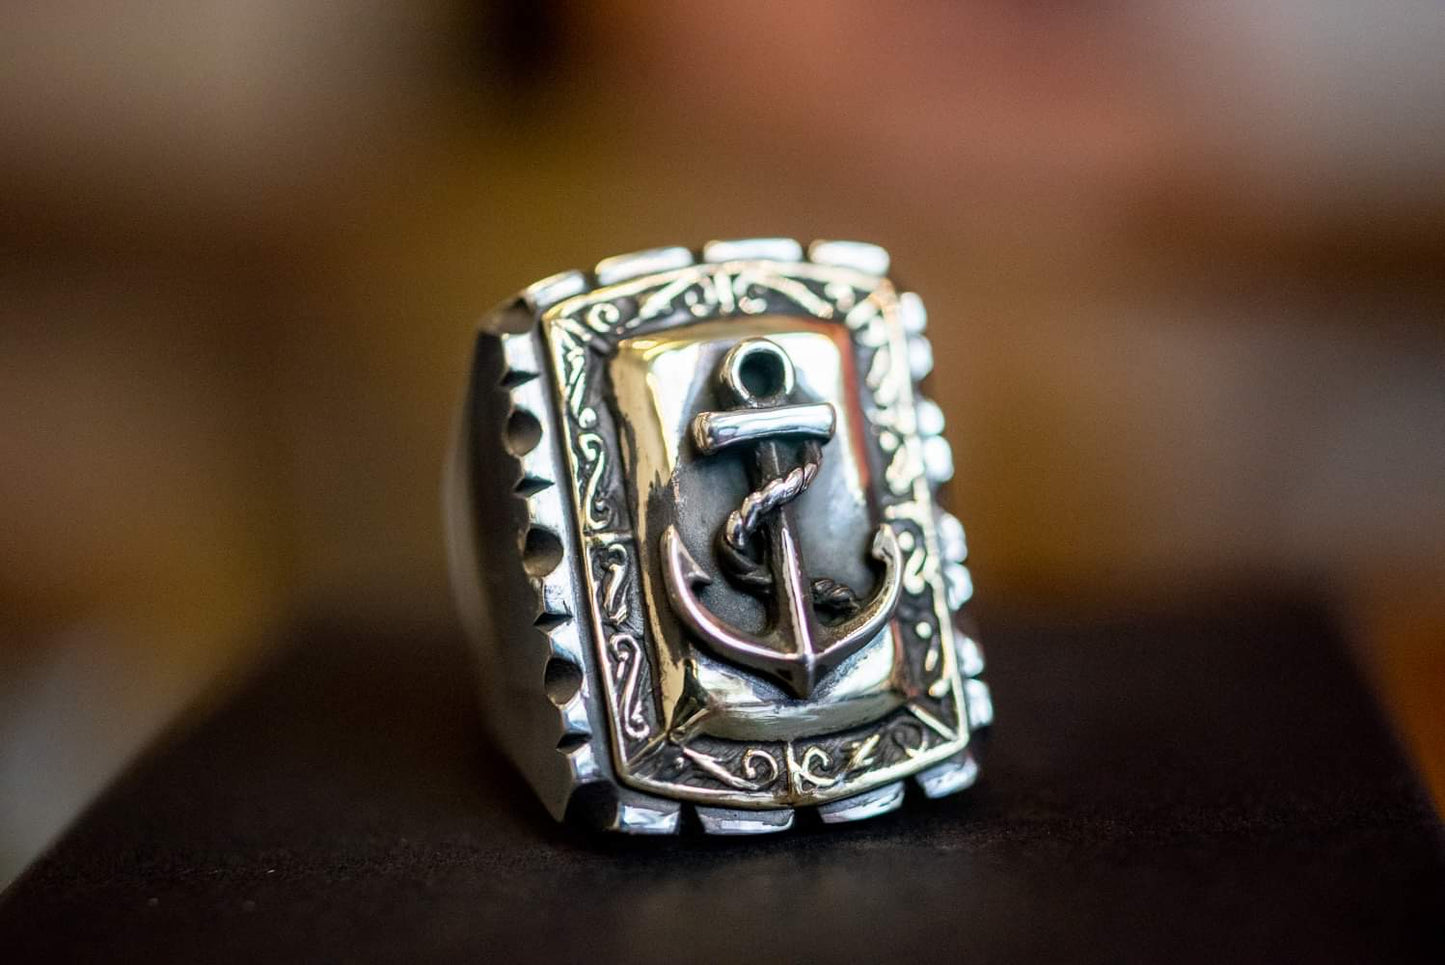 Sterling silver and brass ring, featuring an anchor emblem, handmade in South Korea.